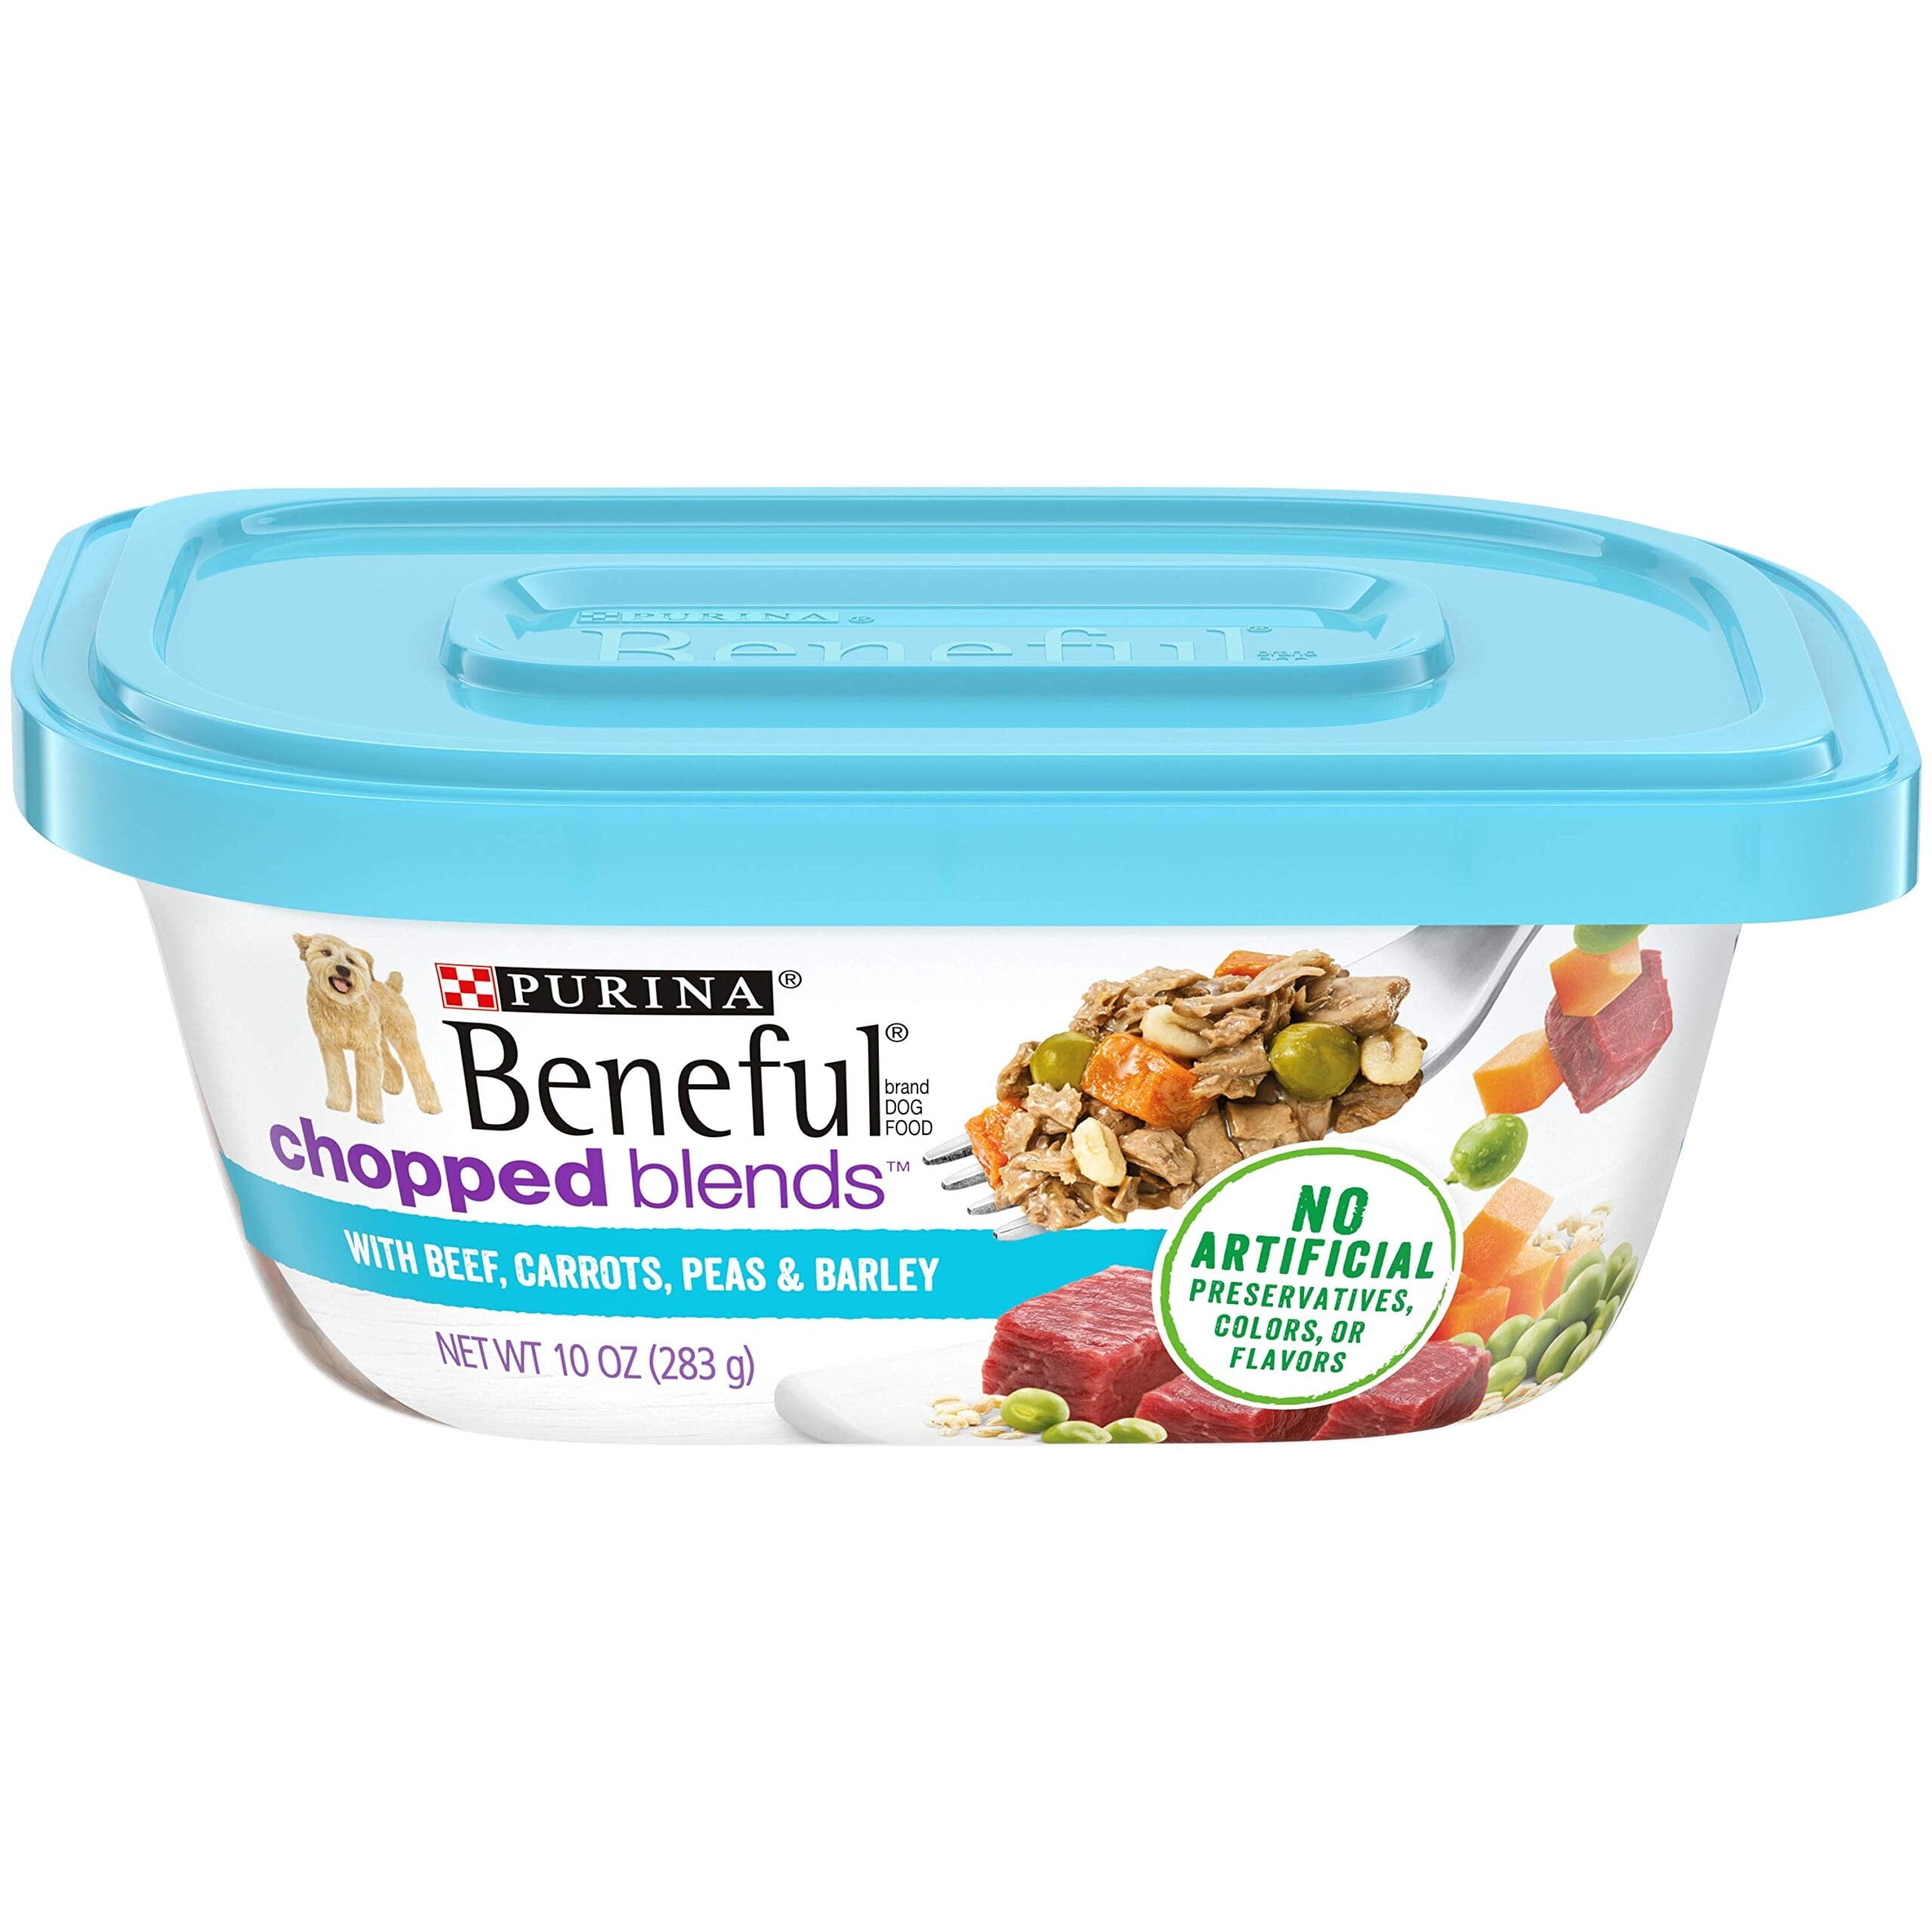 Purina Beneful Prepared Meals Chopped Blends Beef Carrots Peas and Barley Wet Dog Food Trays - 10 Oz - Case of 8  